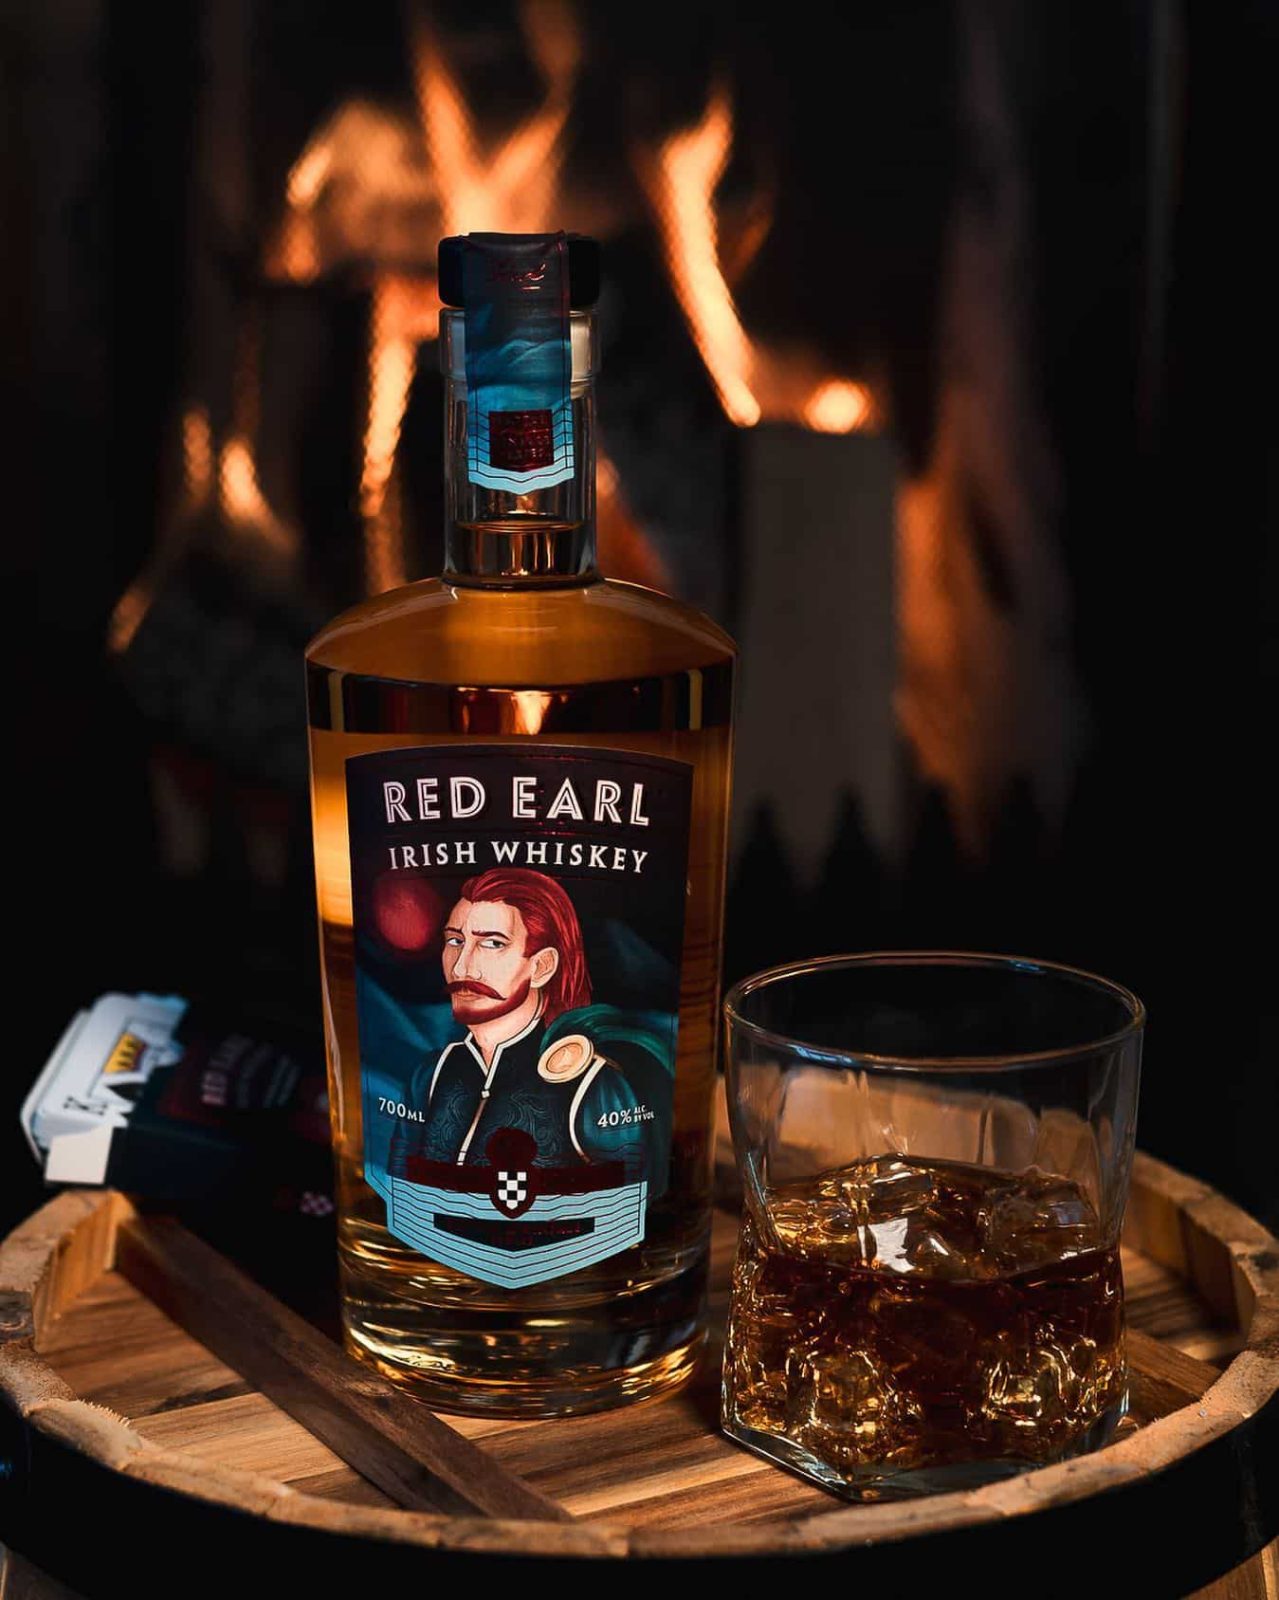 🥃 Cheers to the weekend with a Red Earl Irish Whiskey. Triple-casking delivers roundness of flavour, lengthy finish & an exceptional aroma.

Aged in Bourbon Casks ✔️ 
Aged in Sherry Casks ✔️
Matured in Rioja Casks ✔️

☘️ Available to purchase this weekend in selected @supervalu_irl & @centra_irl and independent off licences nationwide. 

#drinkresponsibly #redearlwhiskey #whiskey #irishwhiskey #triplecasking #casks #whisky #irish #ireland #taste #kinsale #cork #supervalu #centra #spirits